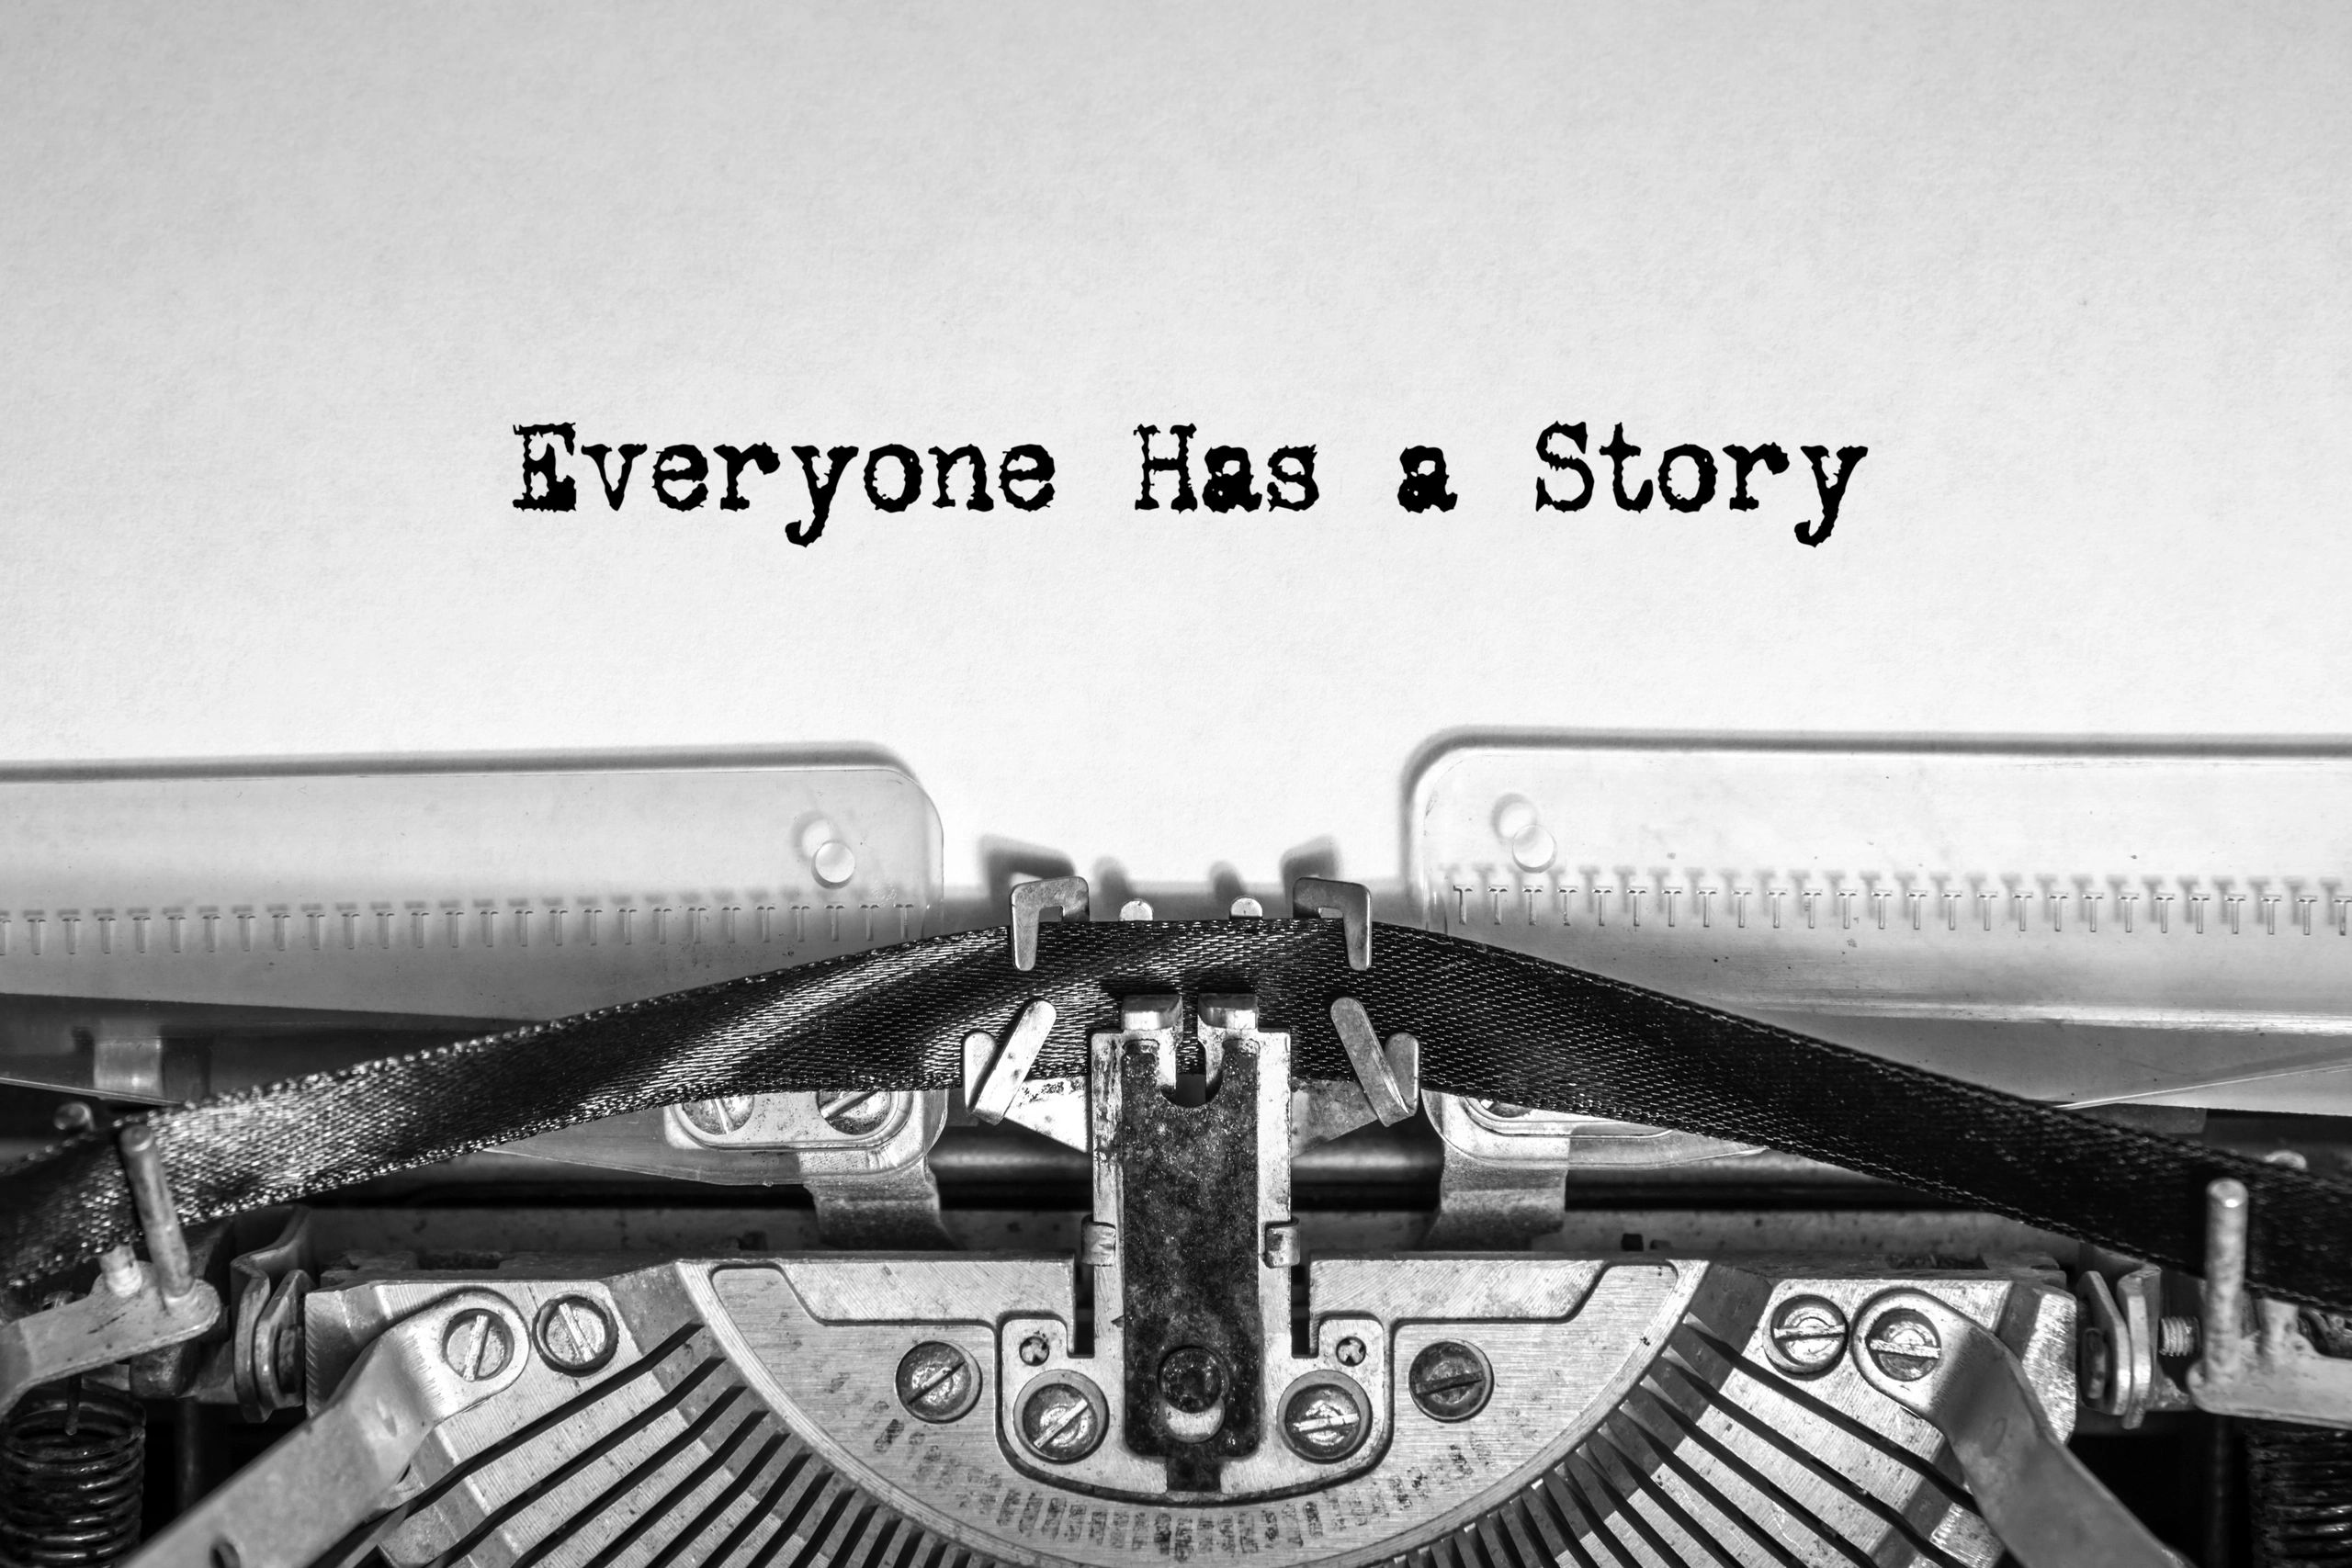 Image of a typewriter ribbon with typed words "Everyone has a story"